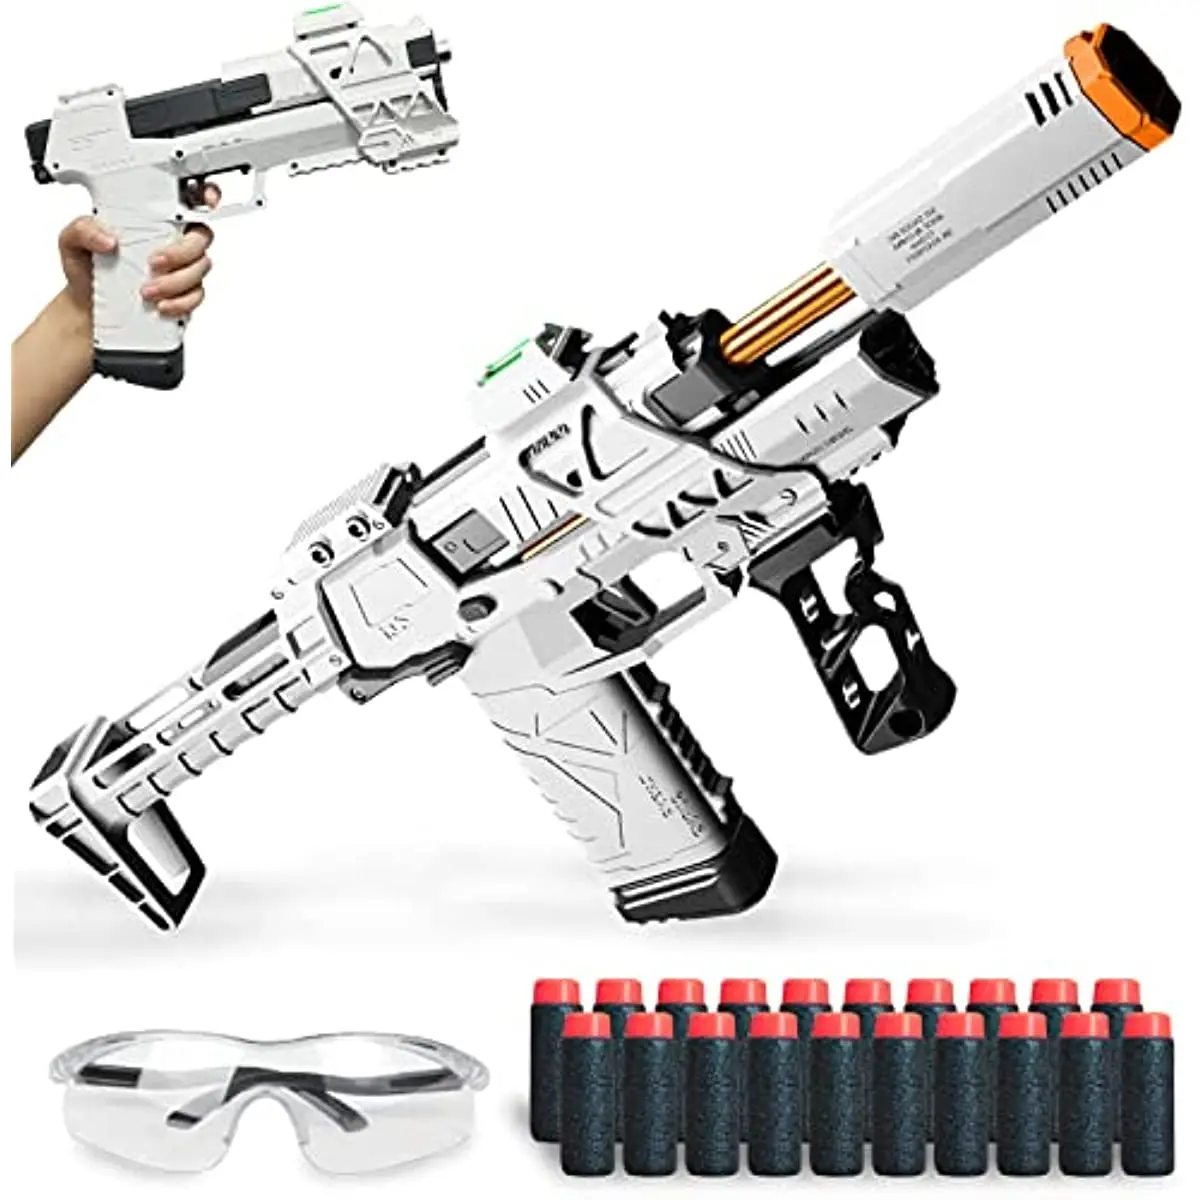 

Upgrade Gecko 3.0 Launcher Soft Bullet Toy Gun Airsoft Blaster CS Shooting Weapon Outdoor Games Pistol For Adults Boys